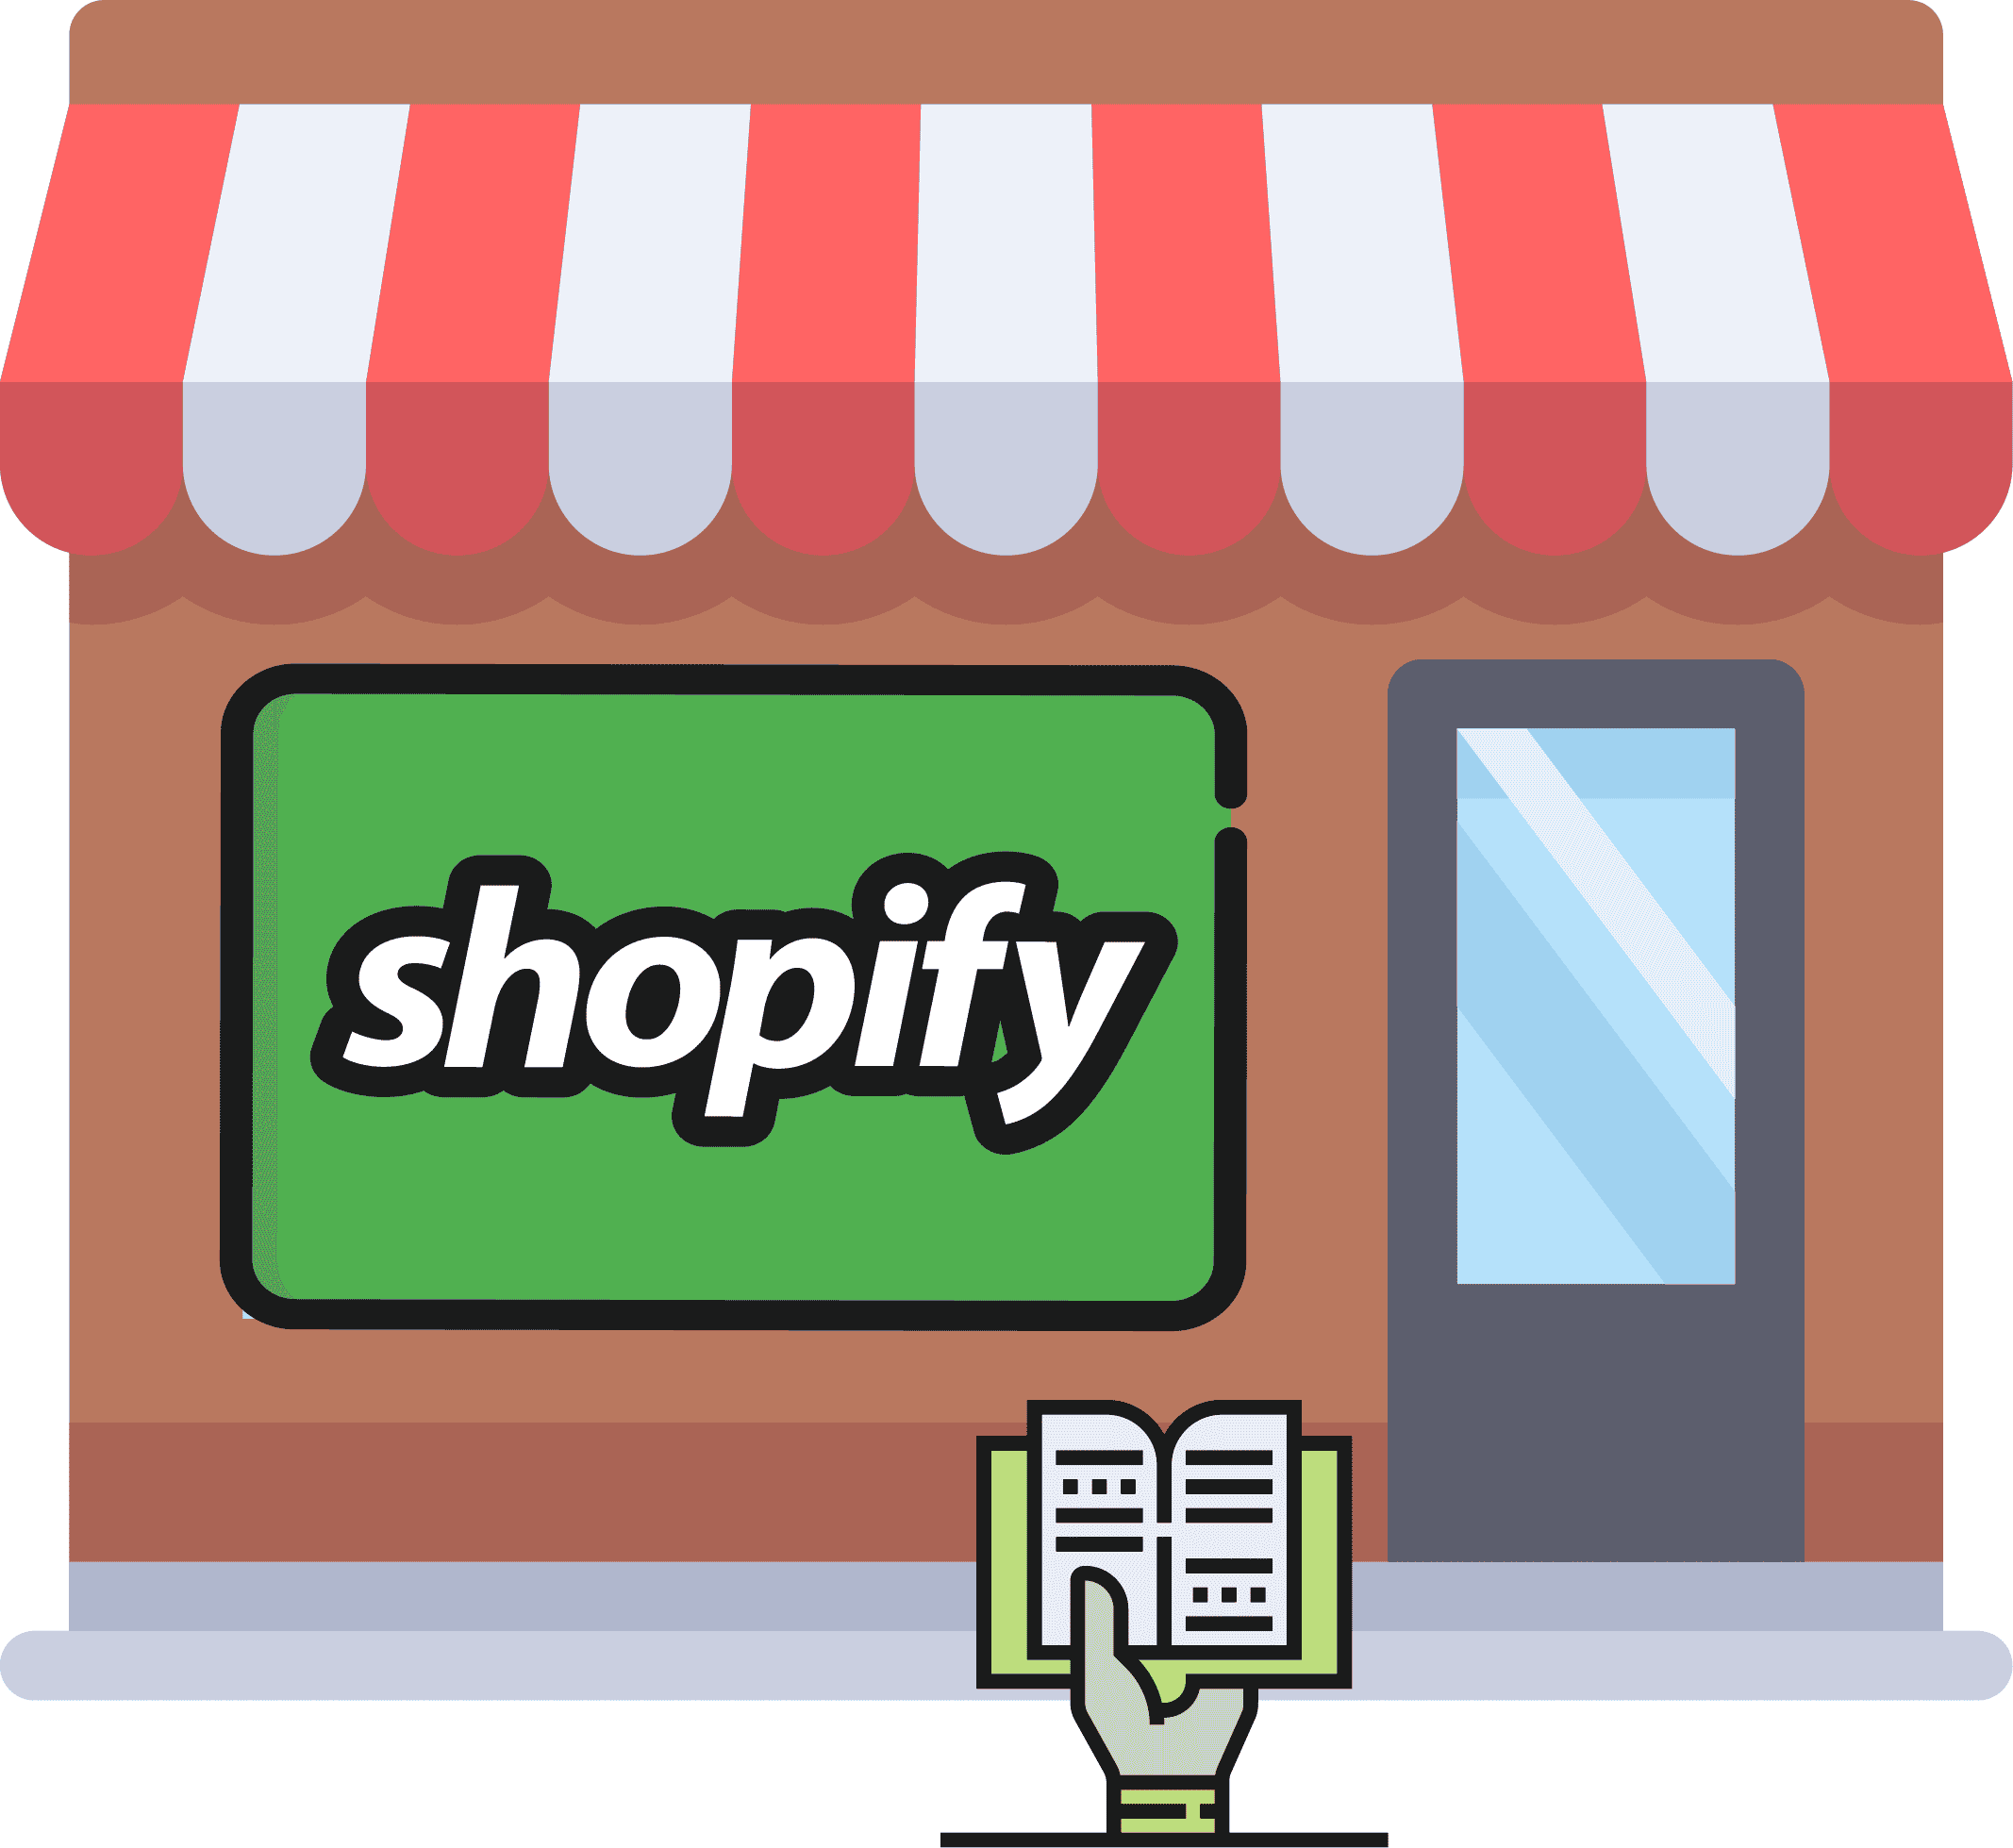 How to setup a Shopify store